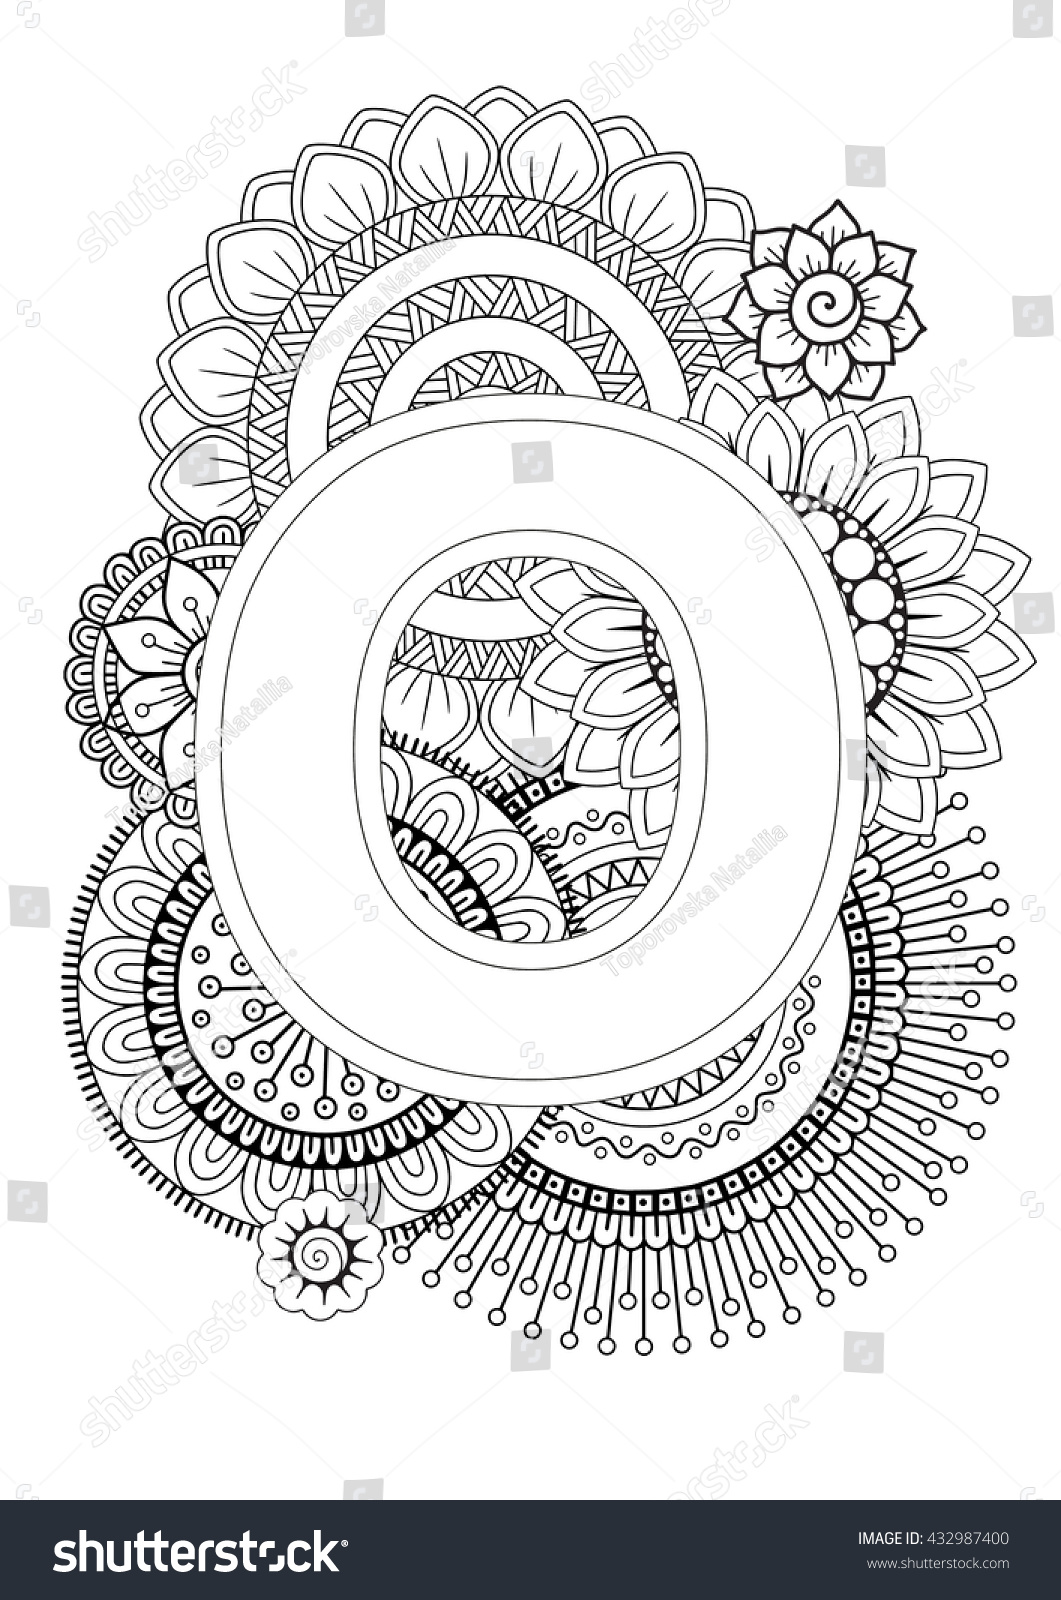 Doodle Floral Letters Coloring Book Adult Stock Vector 432987400